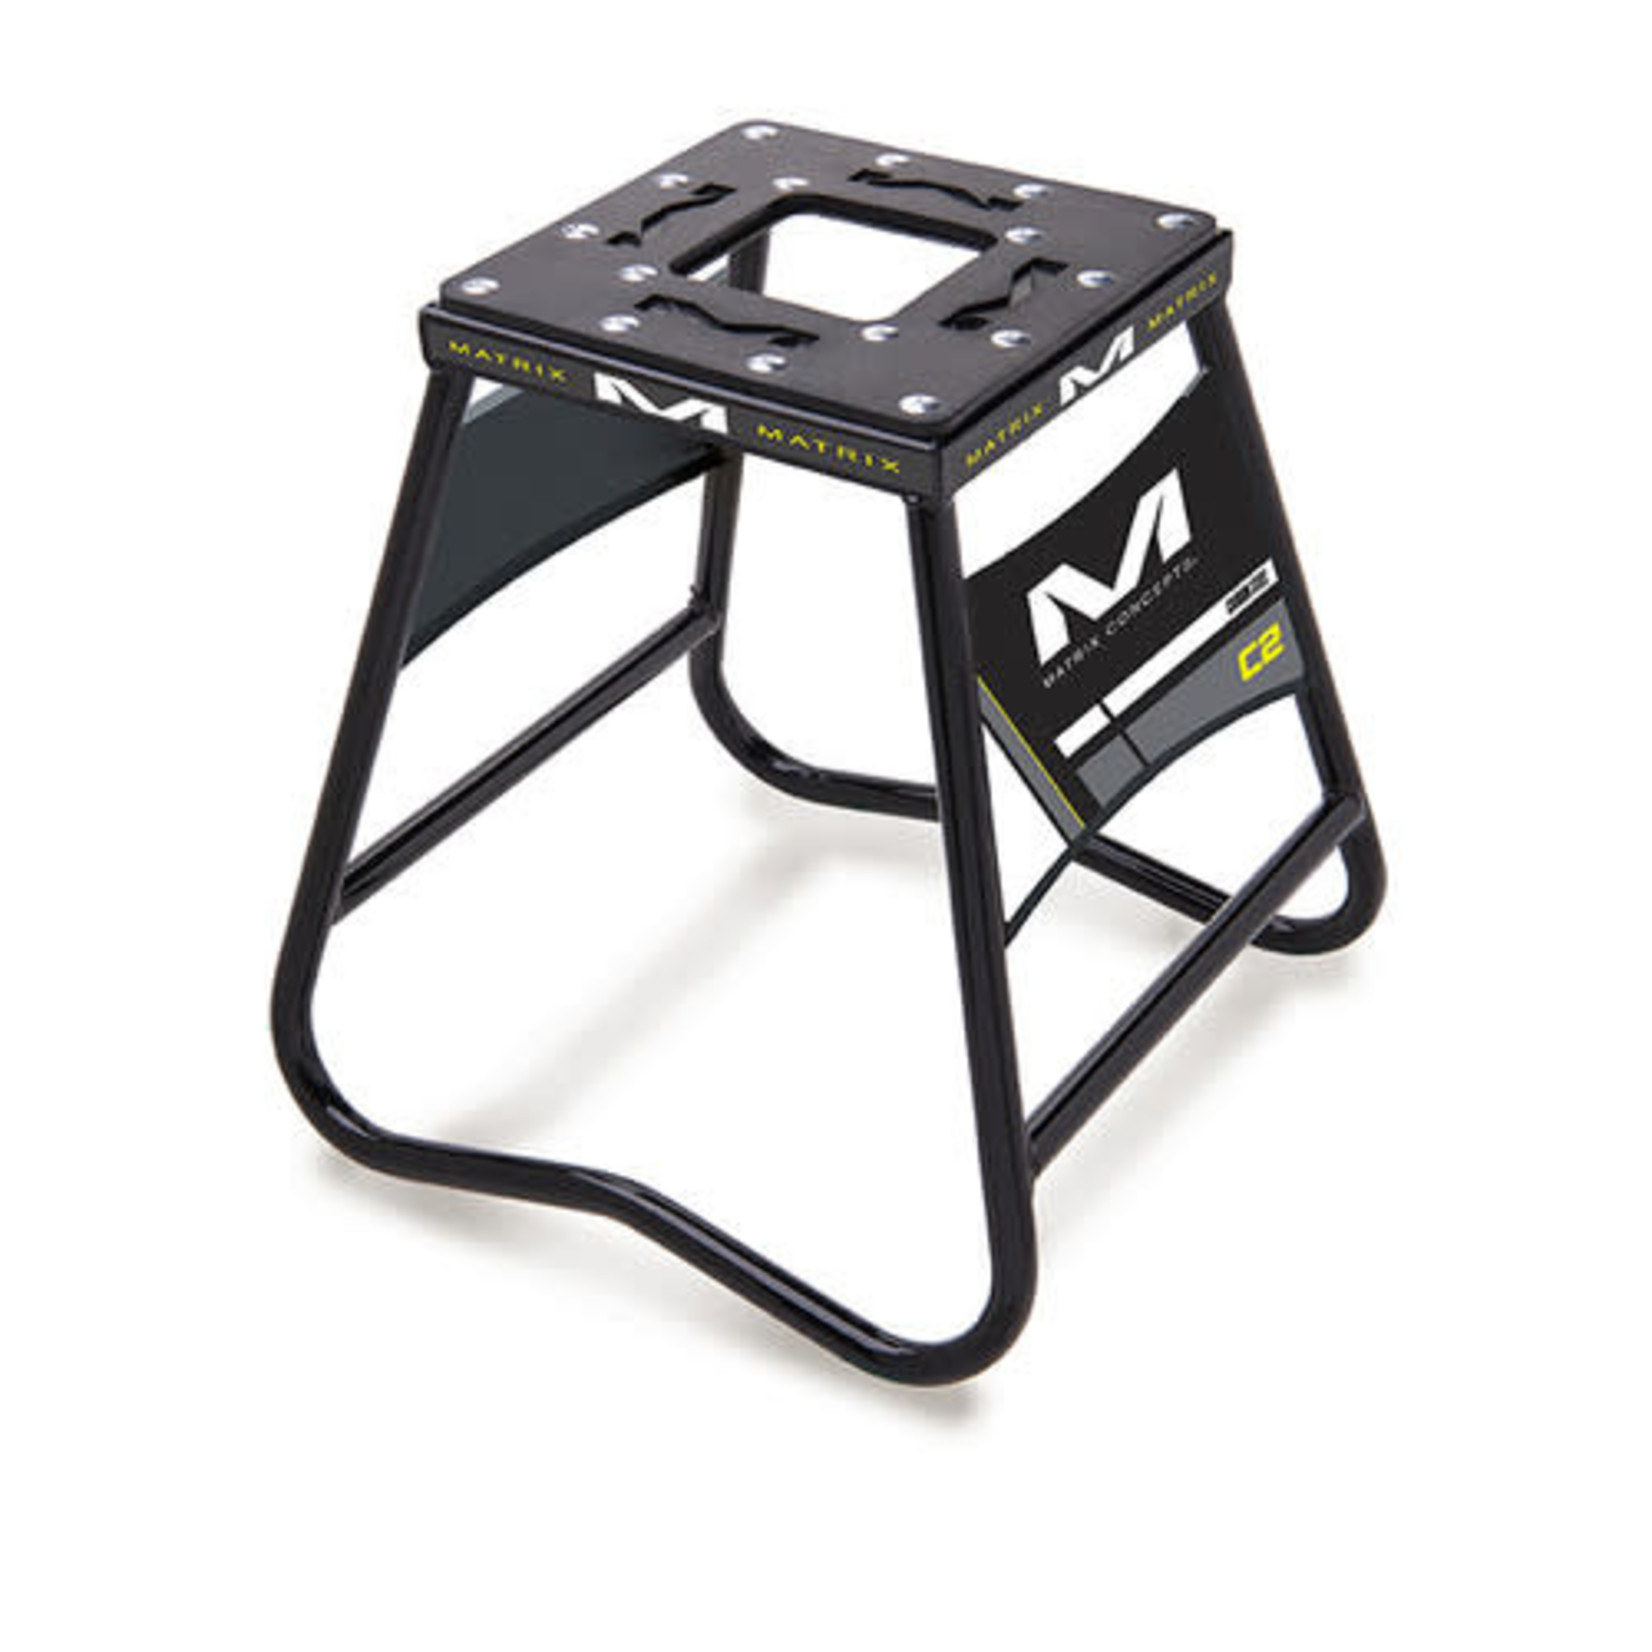 MATRIX CONCEPTS C2 STEEL BIKE STAND WITH PLATE